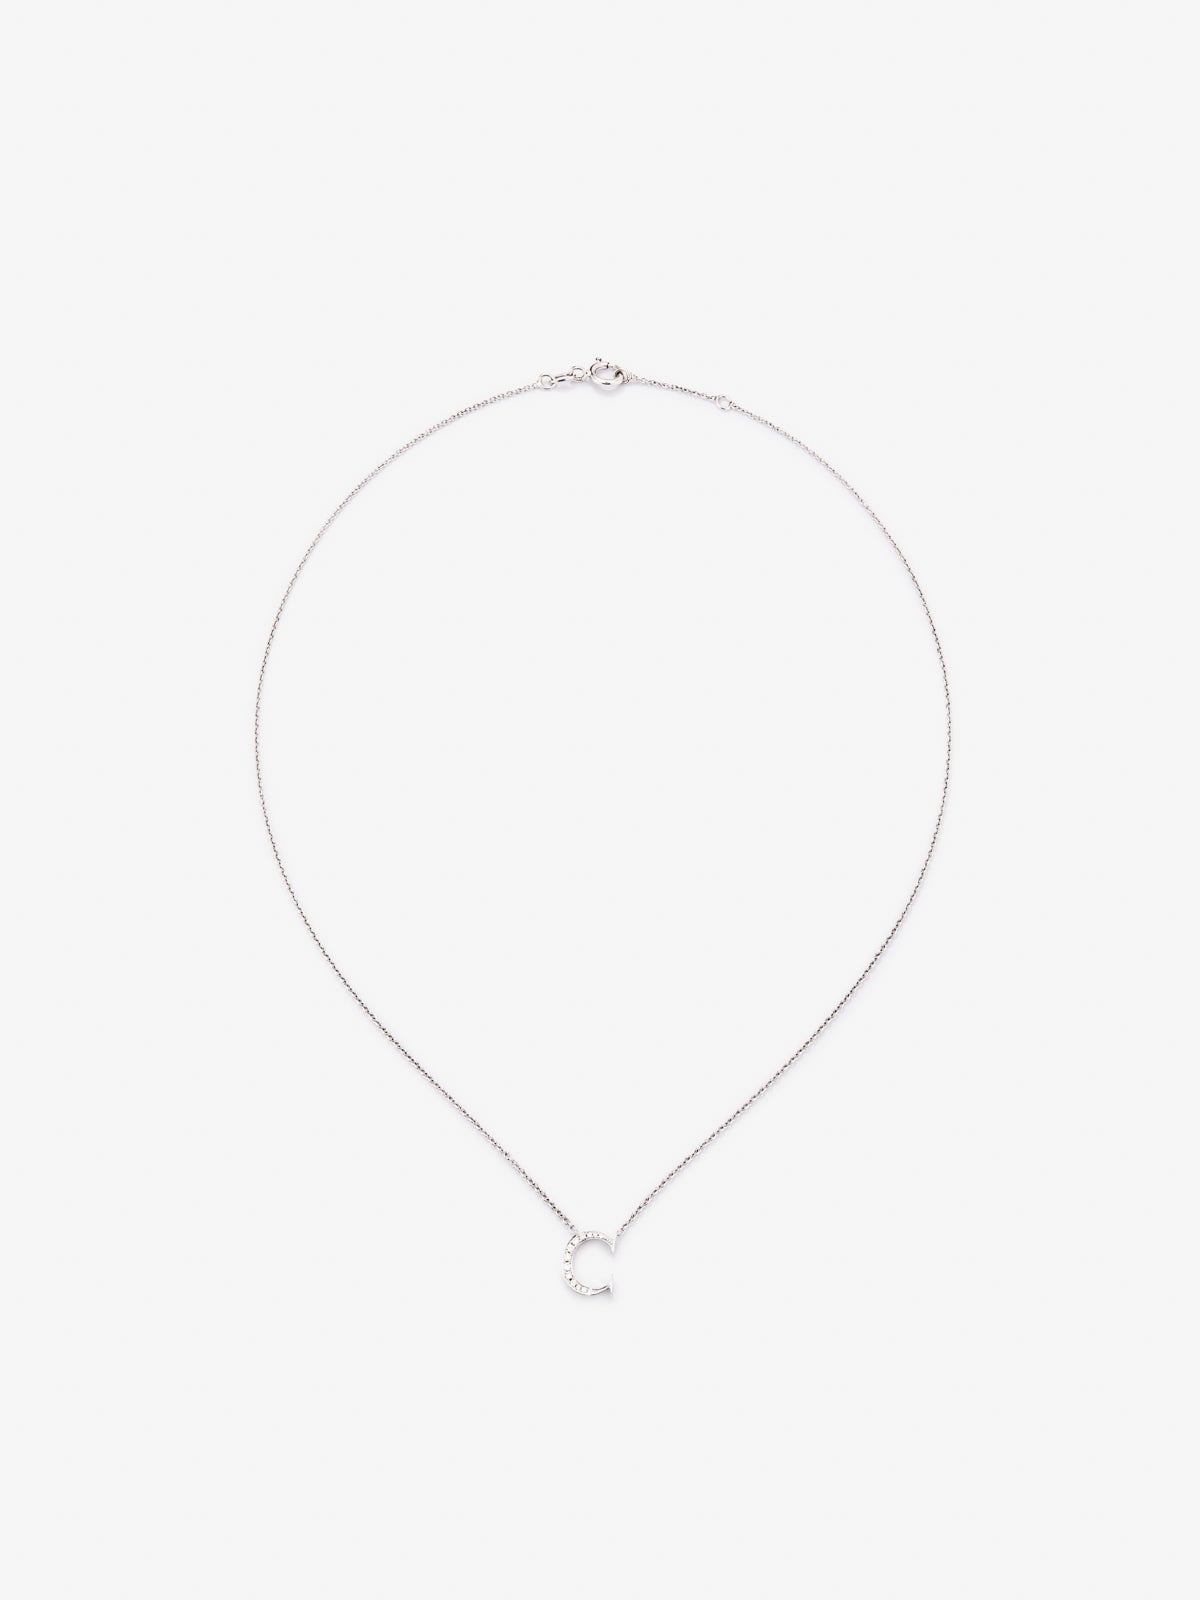 18K white gold pendant chain with diamond initial